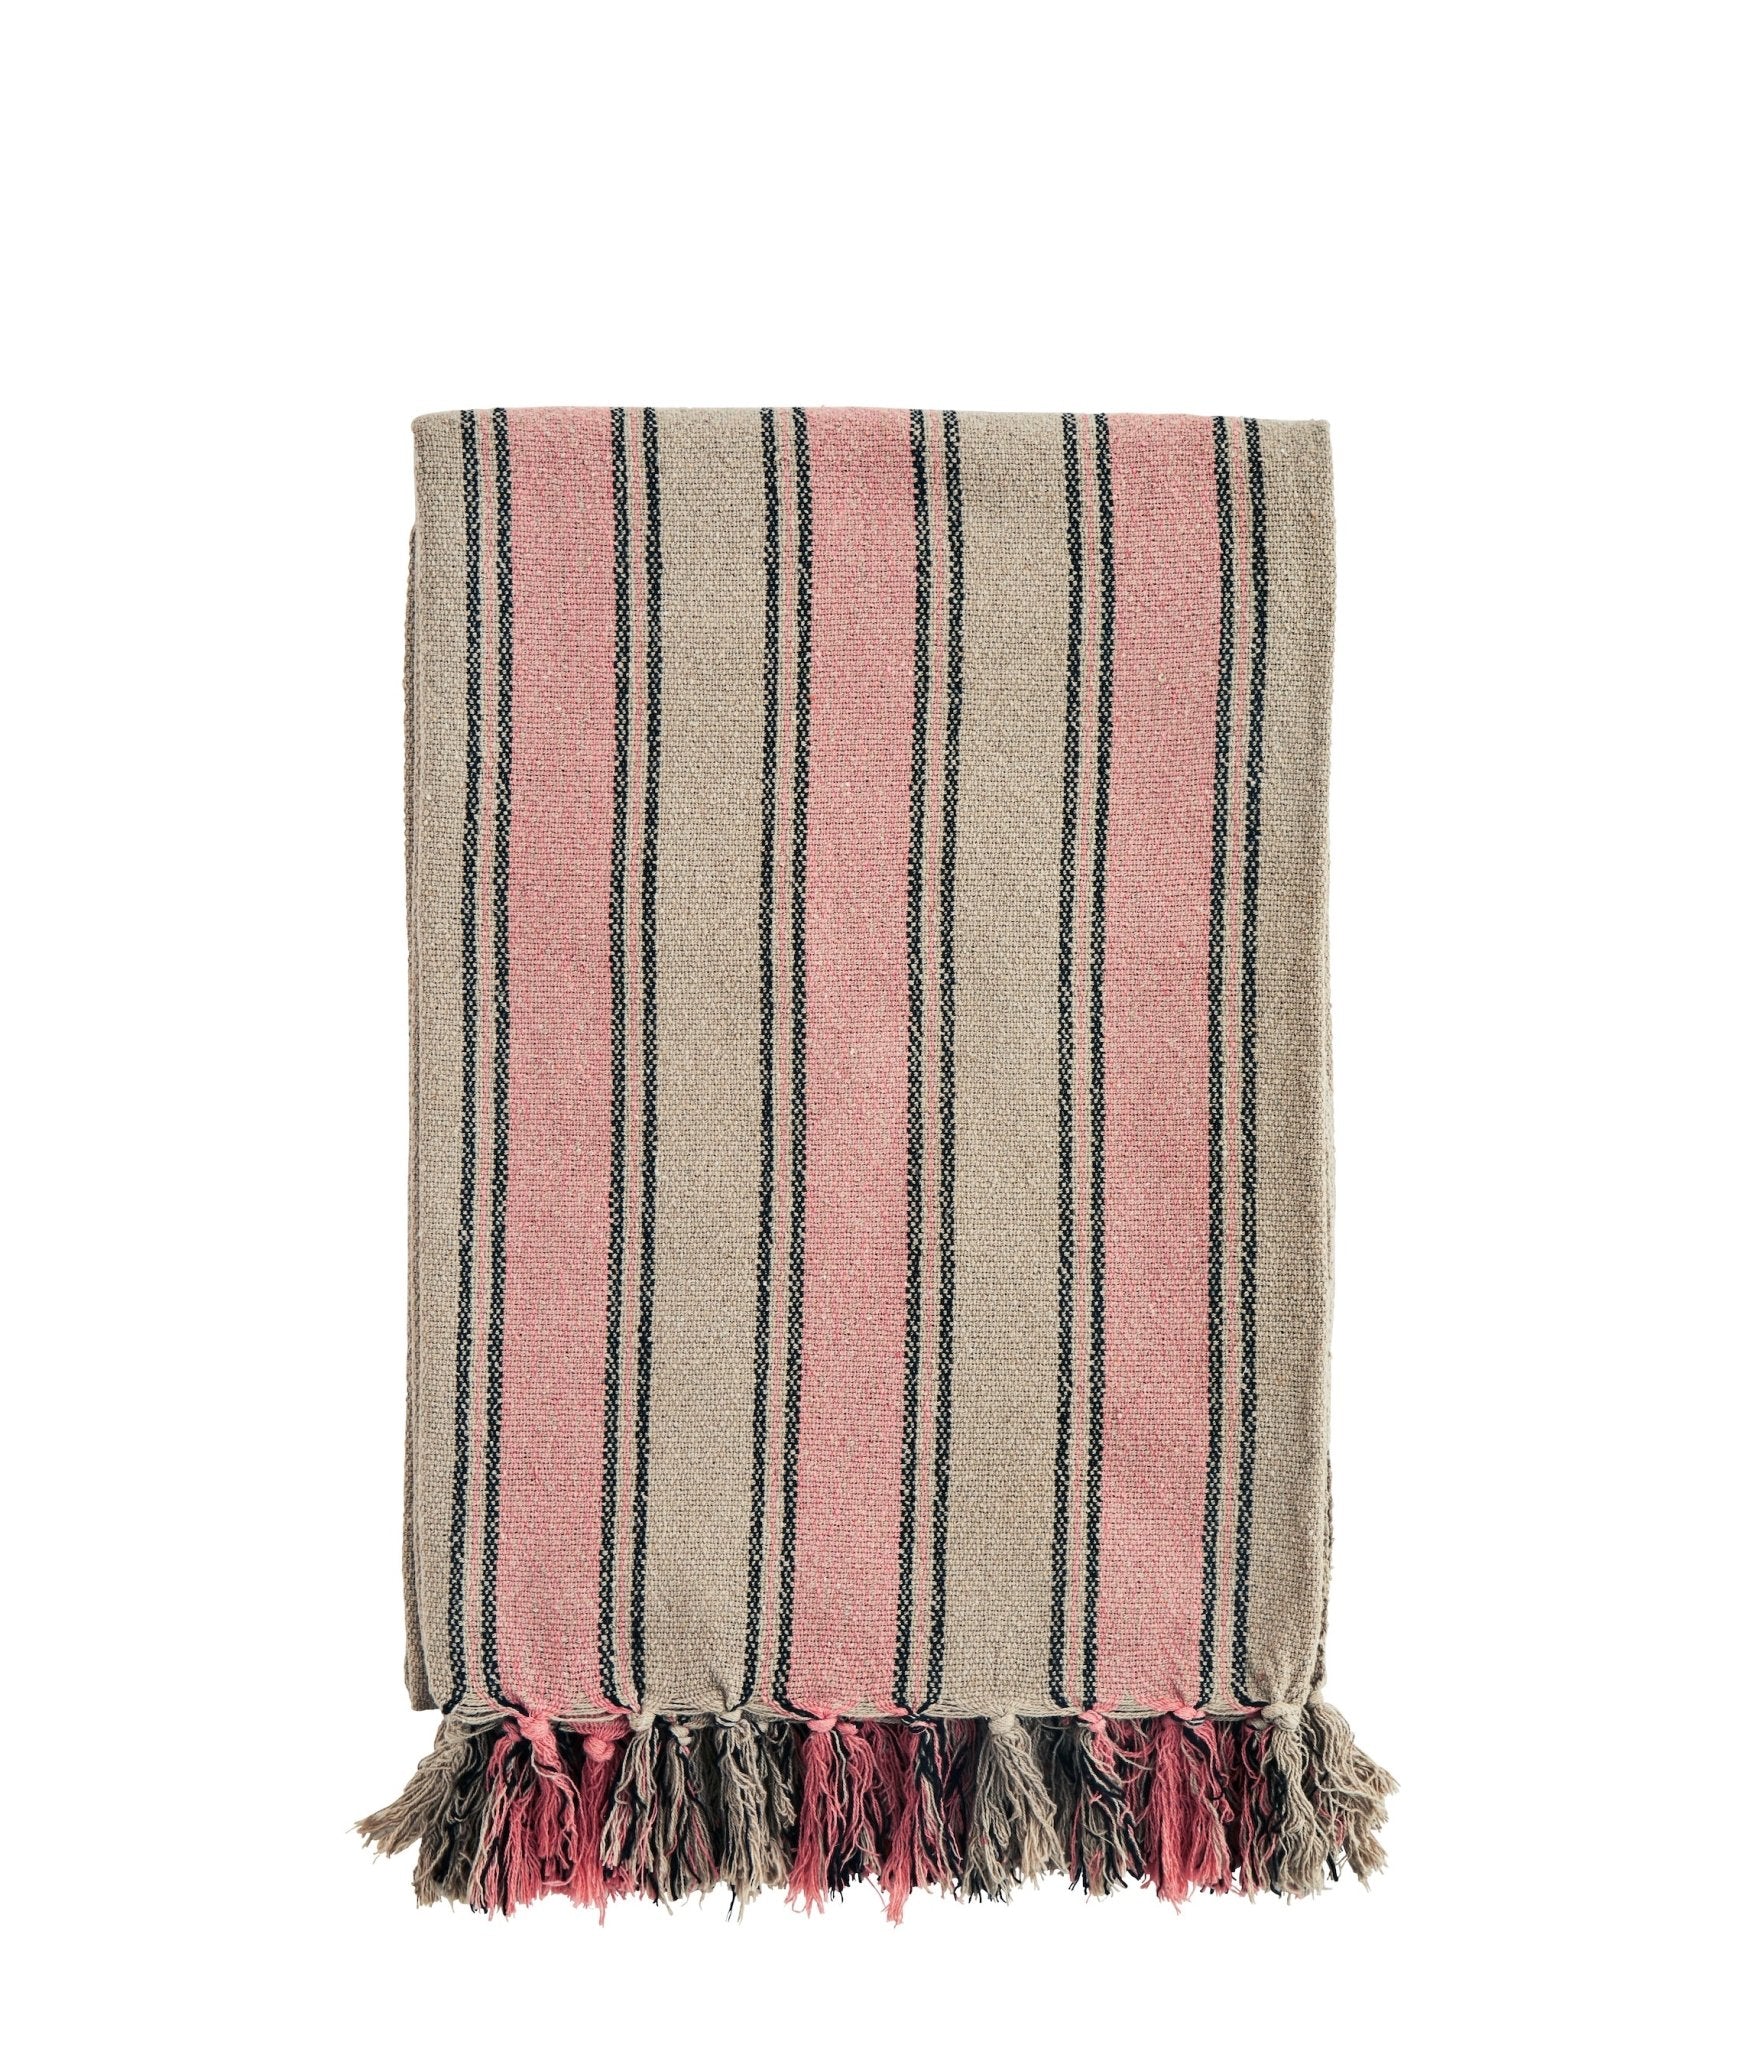 Striped woven taupe and coral throw/ blanket with fringes - Natalia Willmott